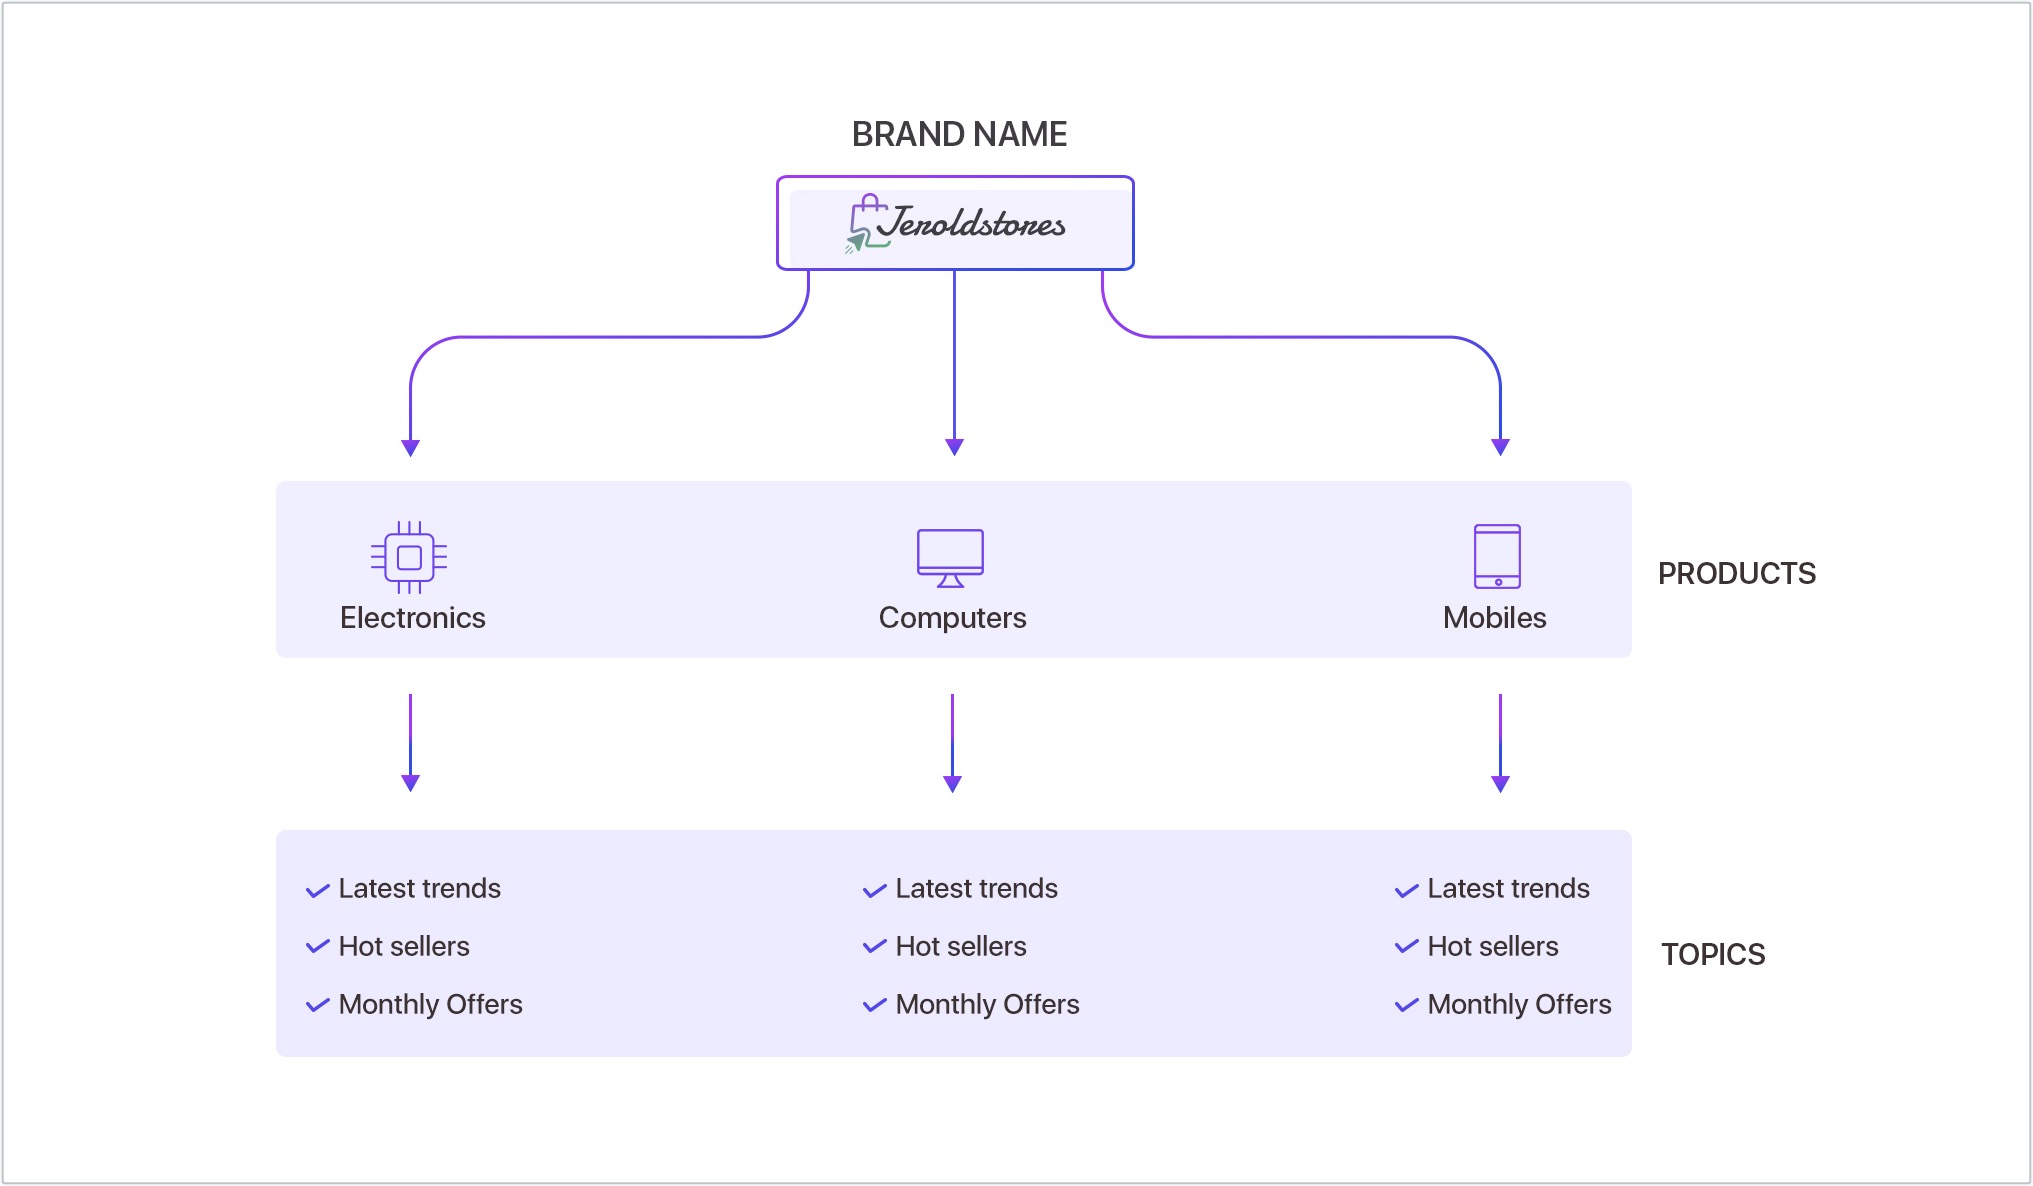 brand - product - topic usecase